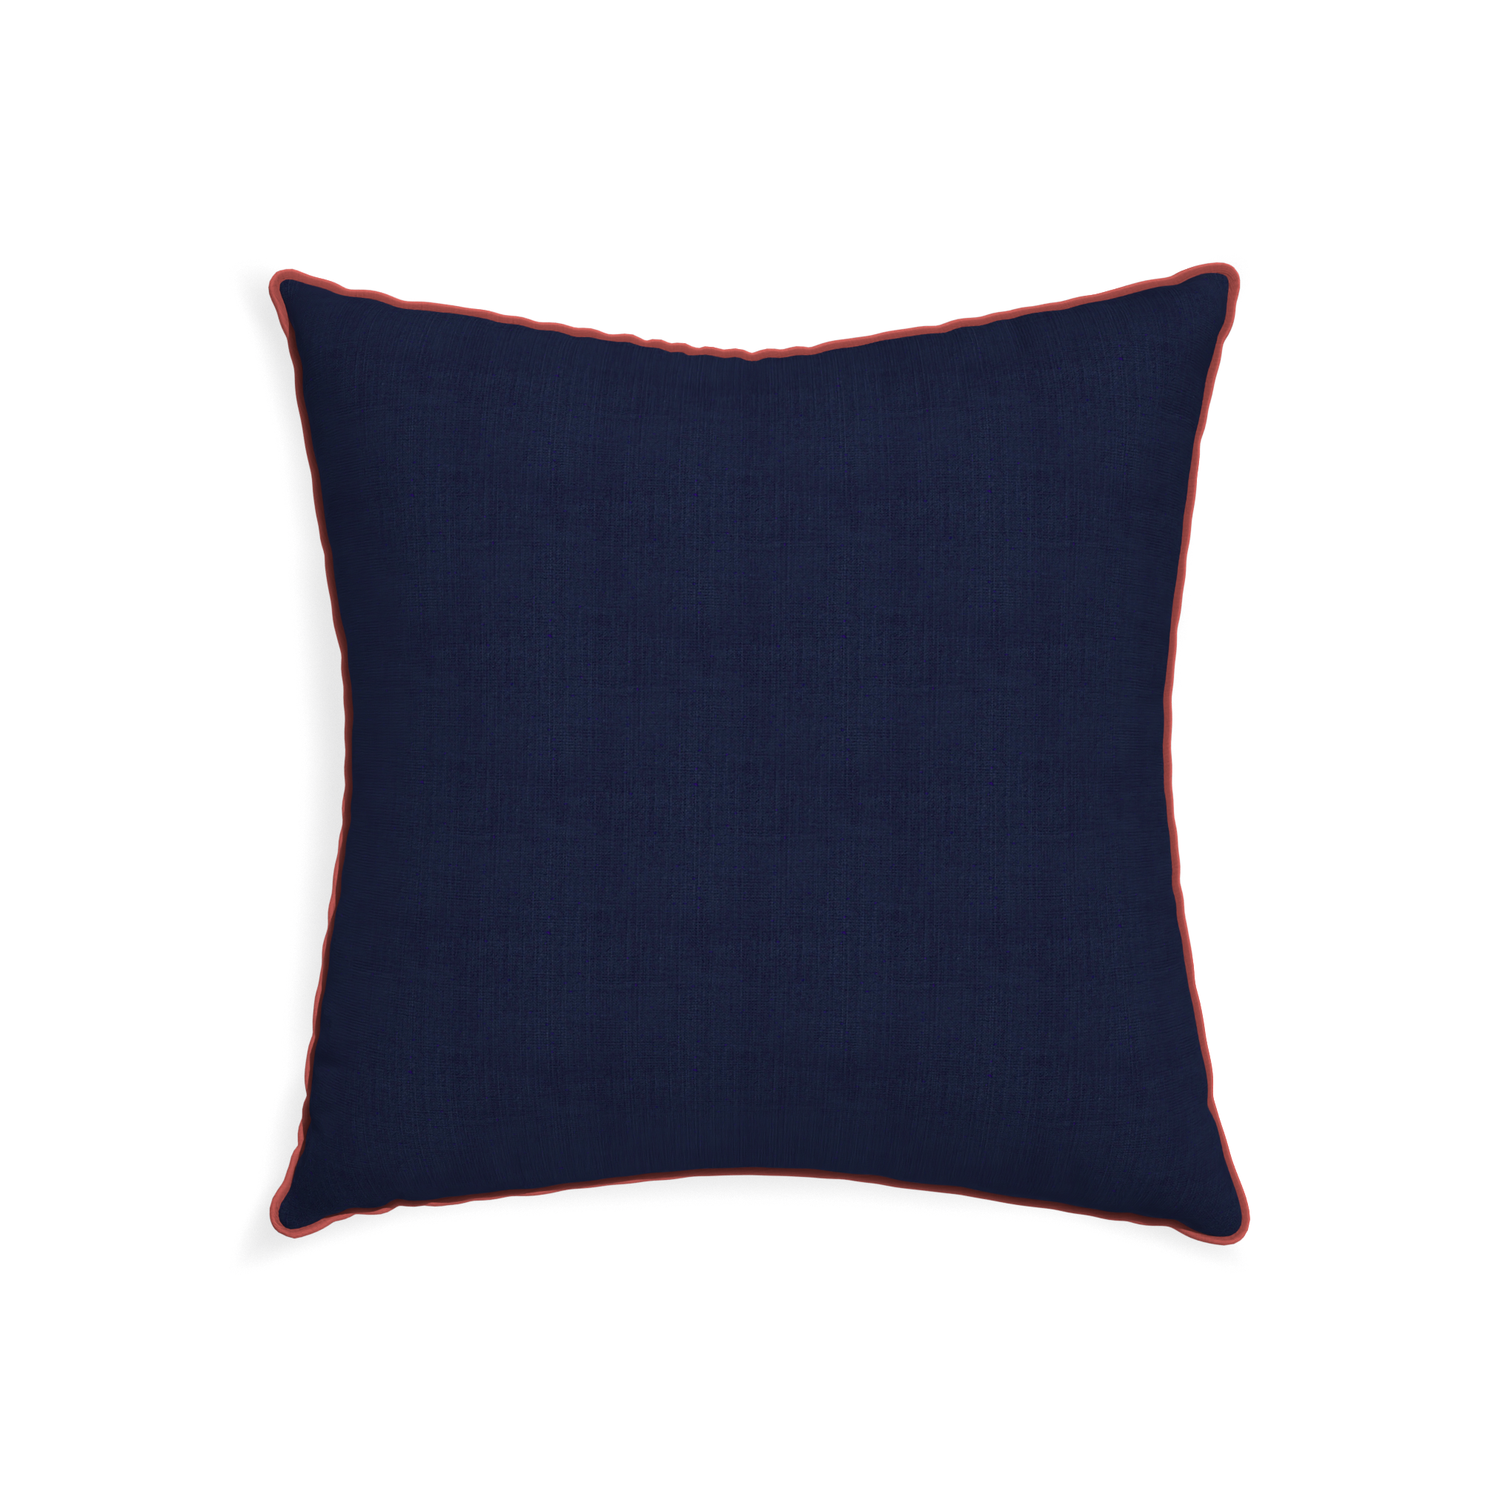 22-square midnight custom pillow with c piping on white background